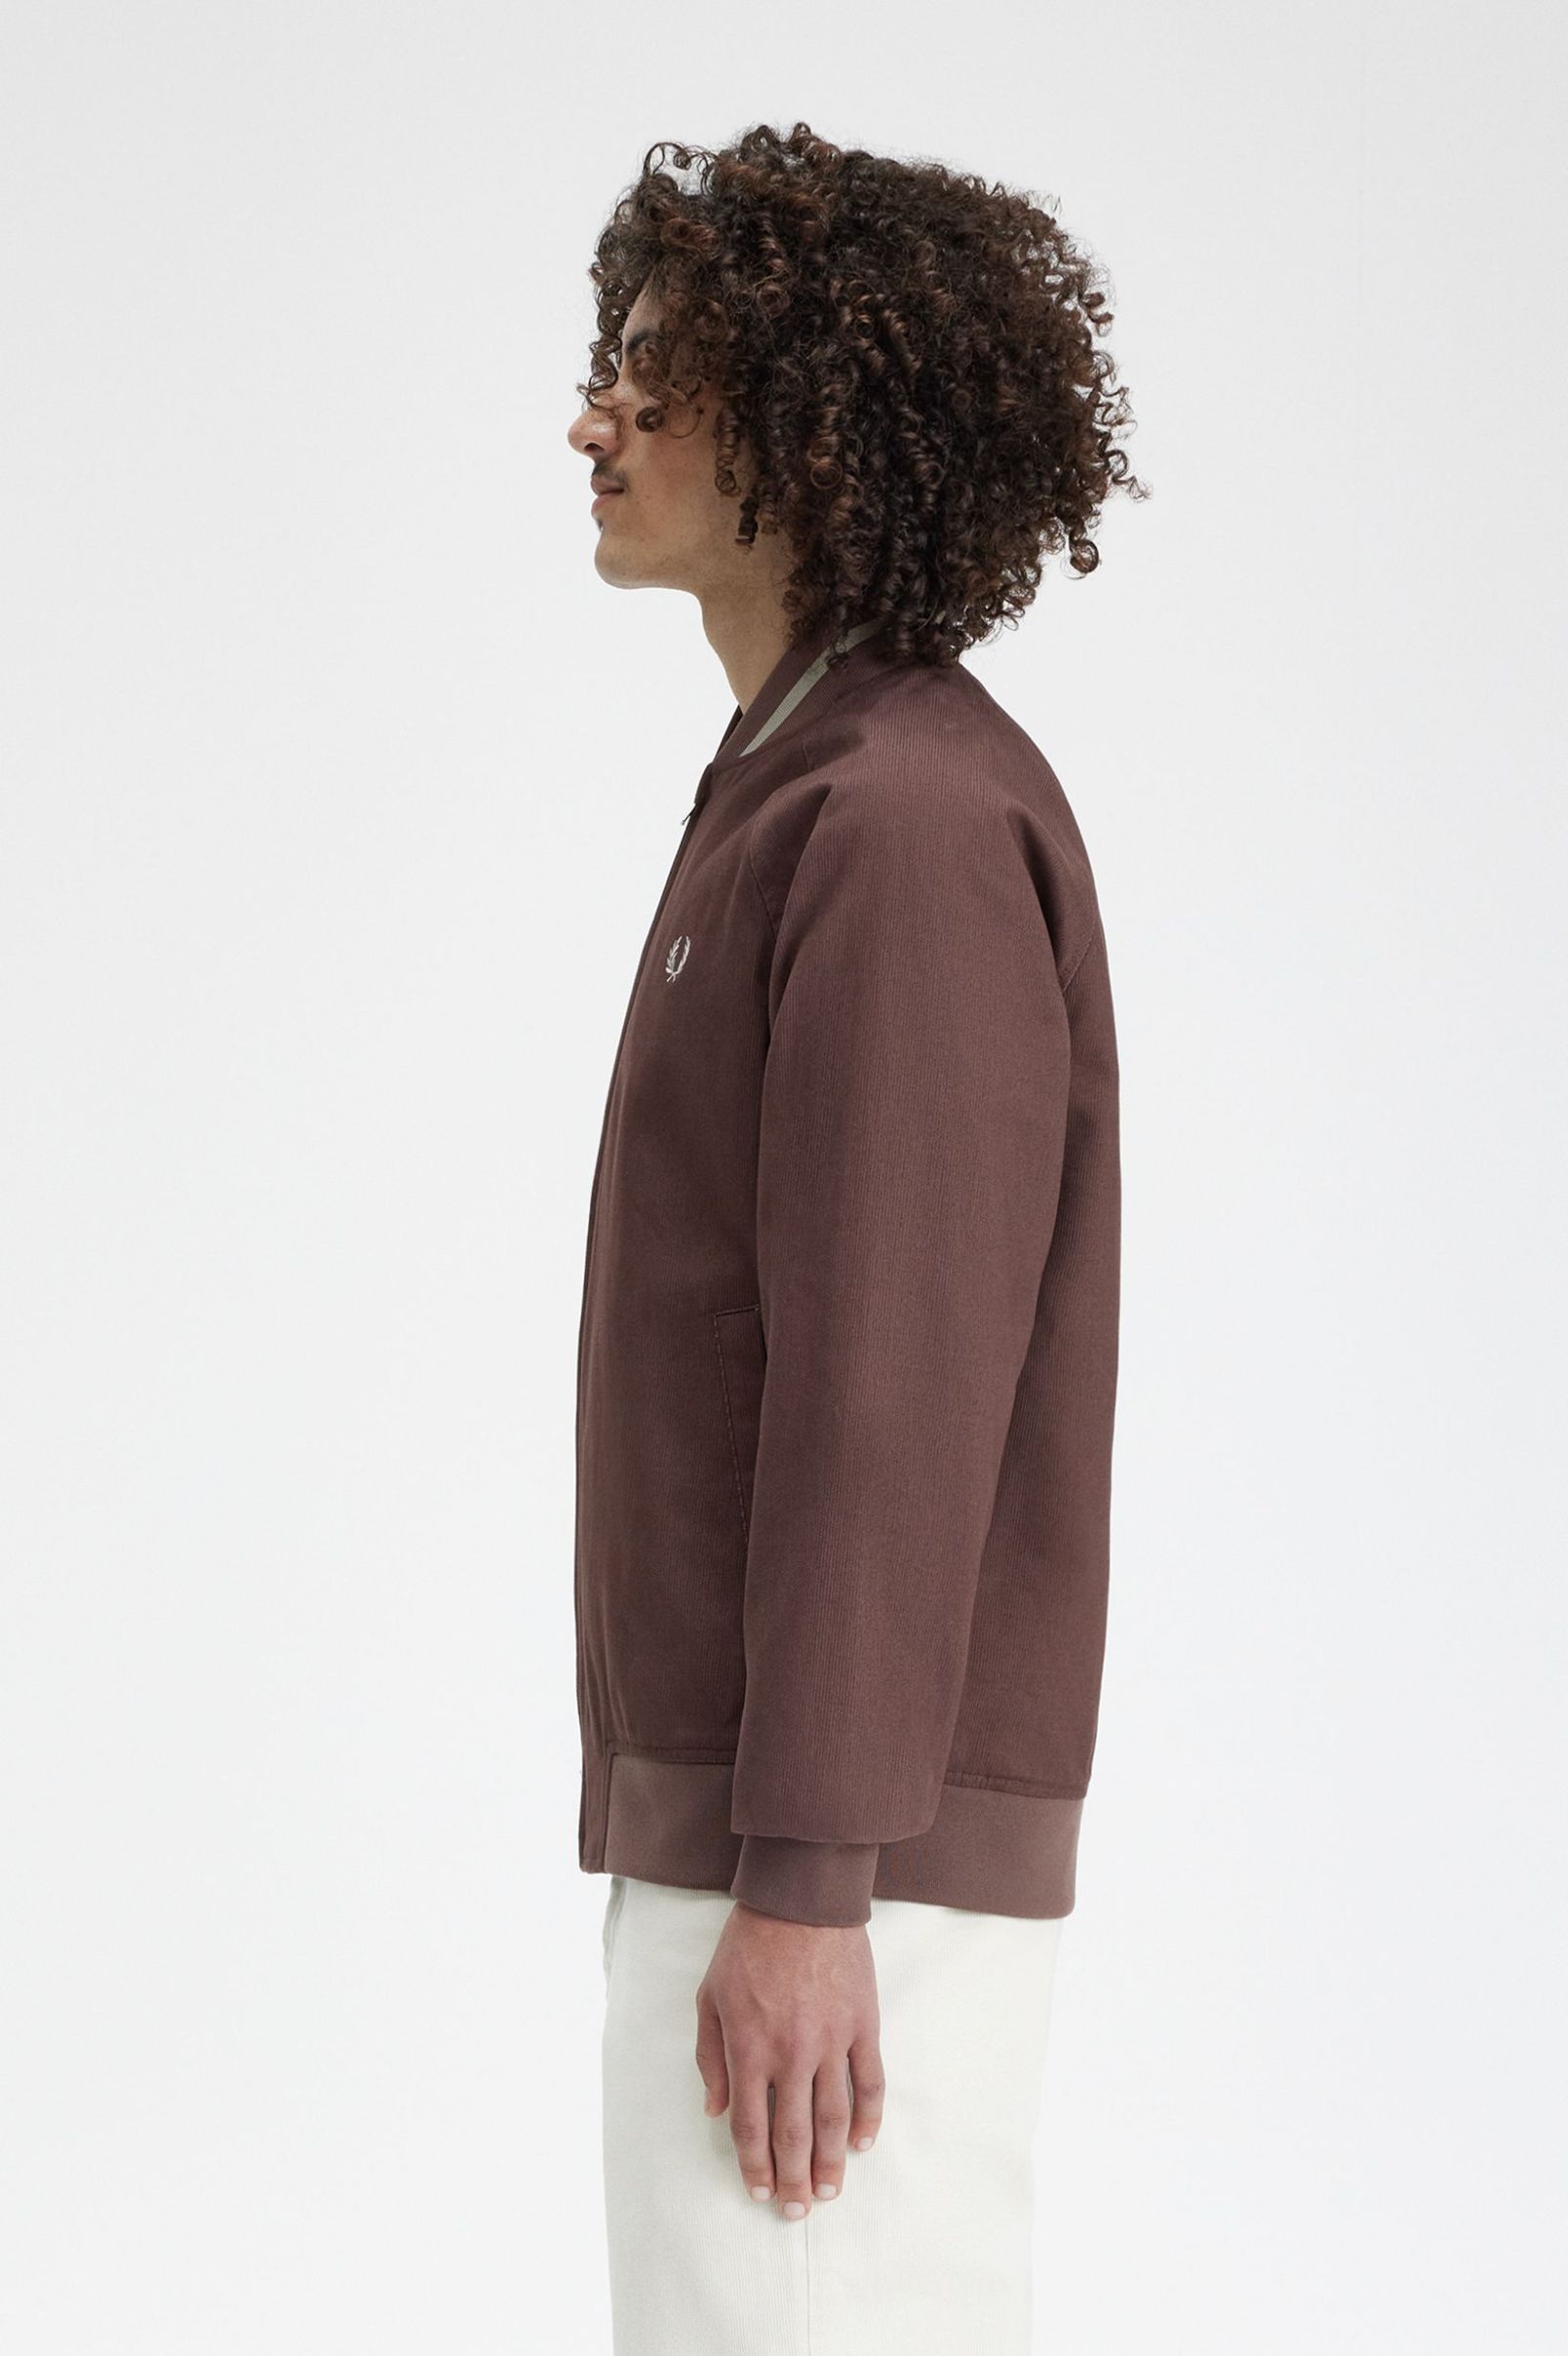 Fred Perry Corduroy Tennis Bomber in Carrington Brick